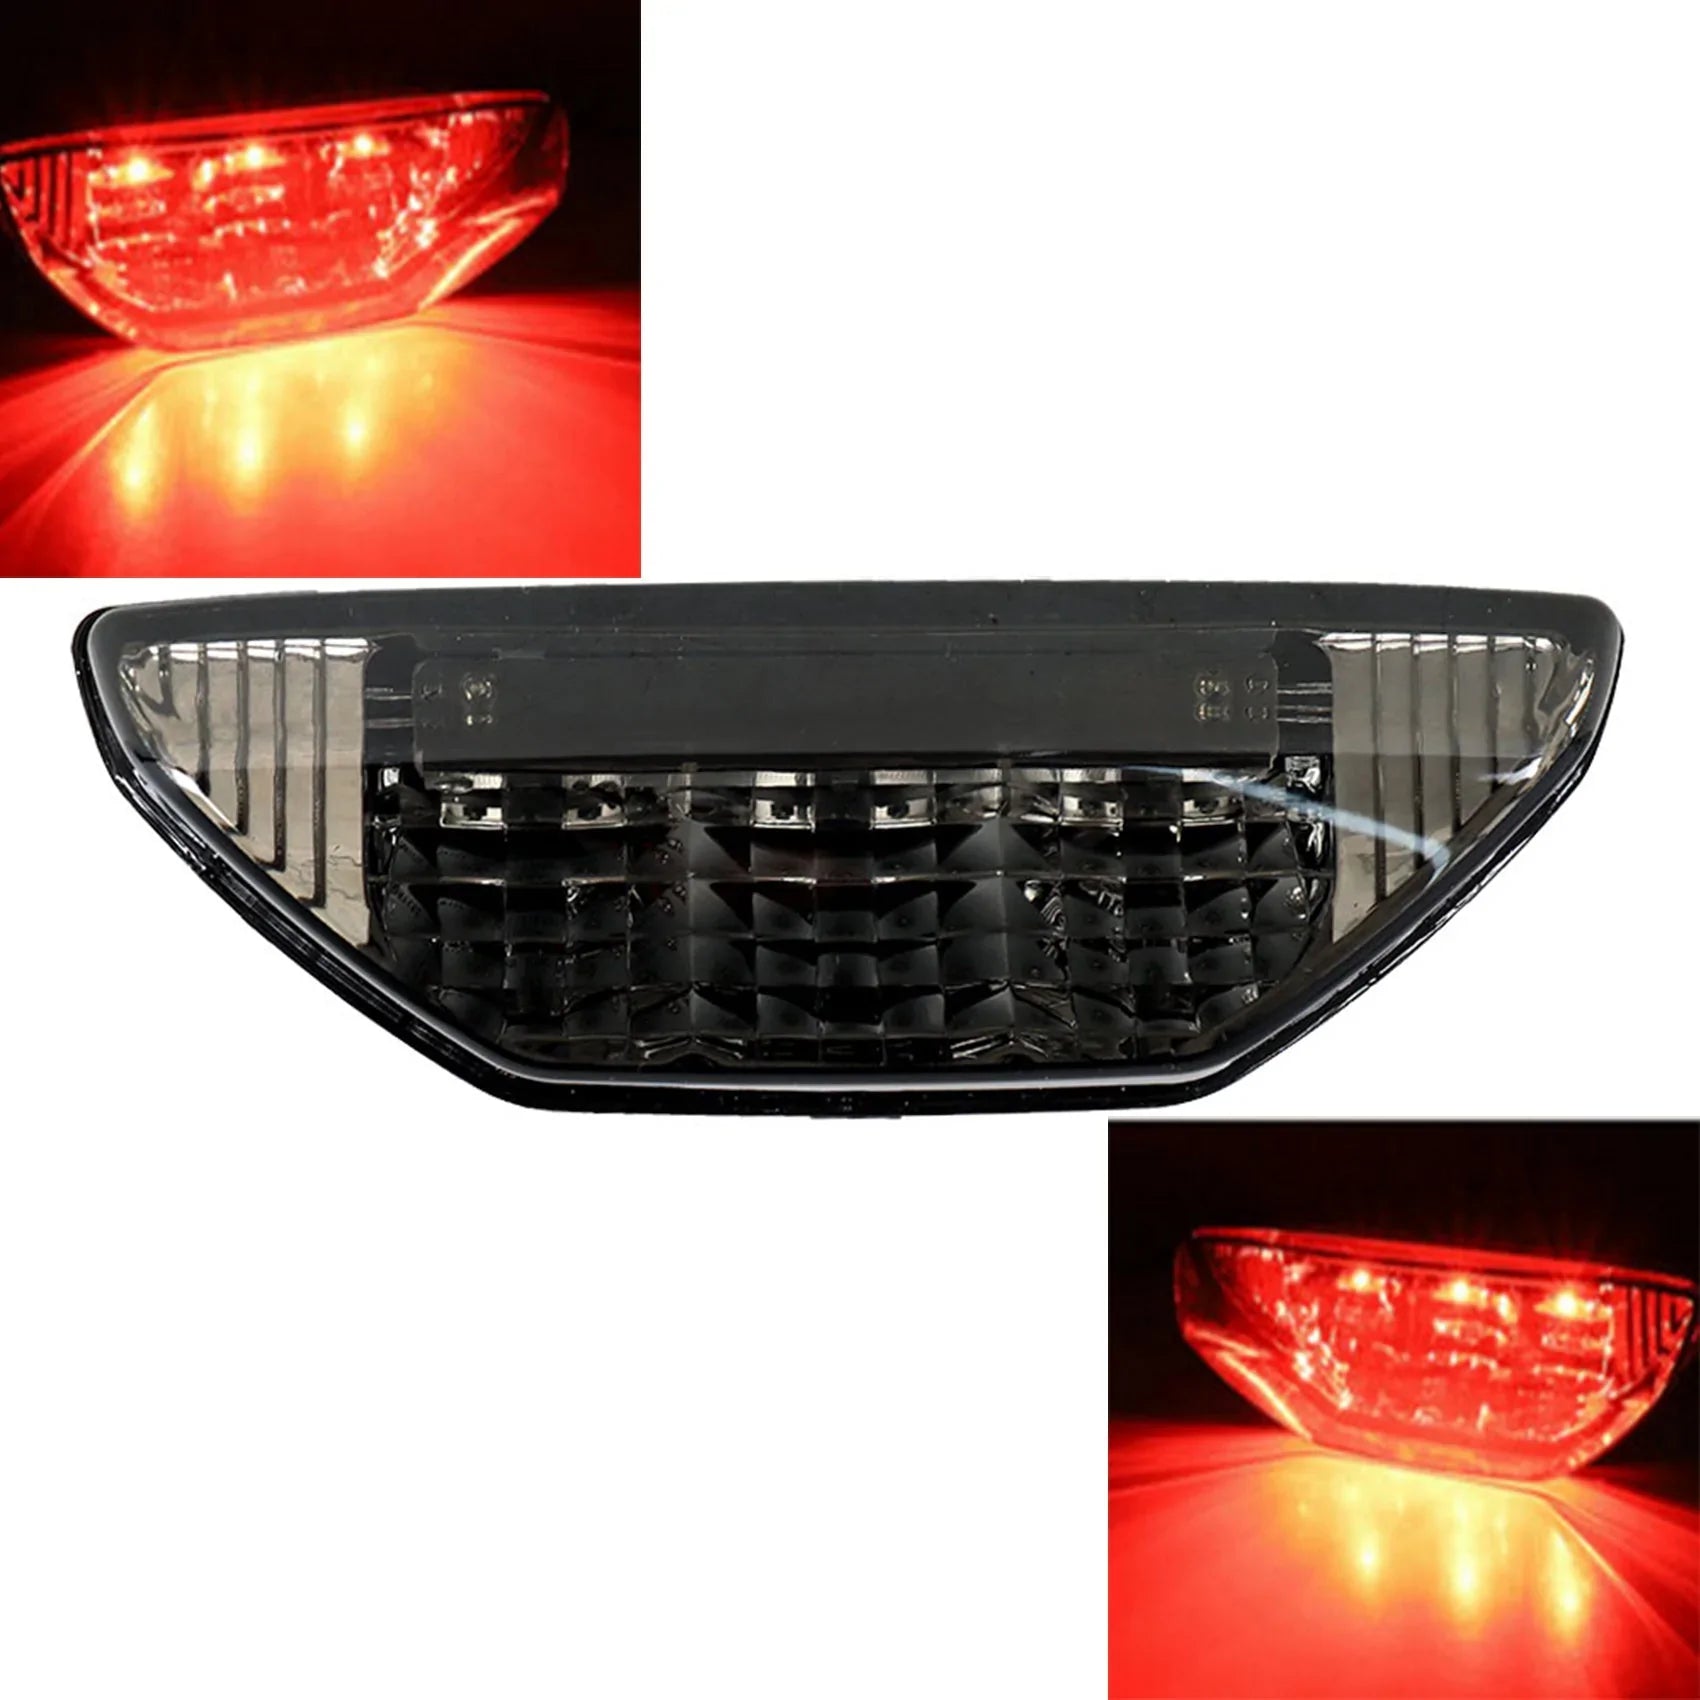 Labwork Rear LED Brake Tail Light Lamp Replacement for Rancher 420